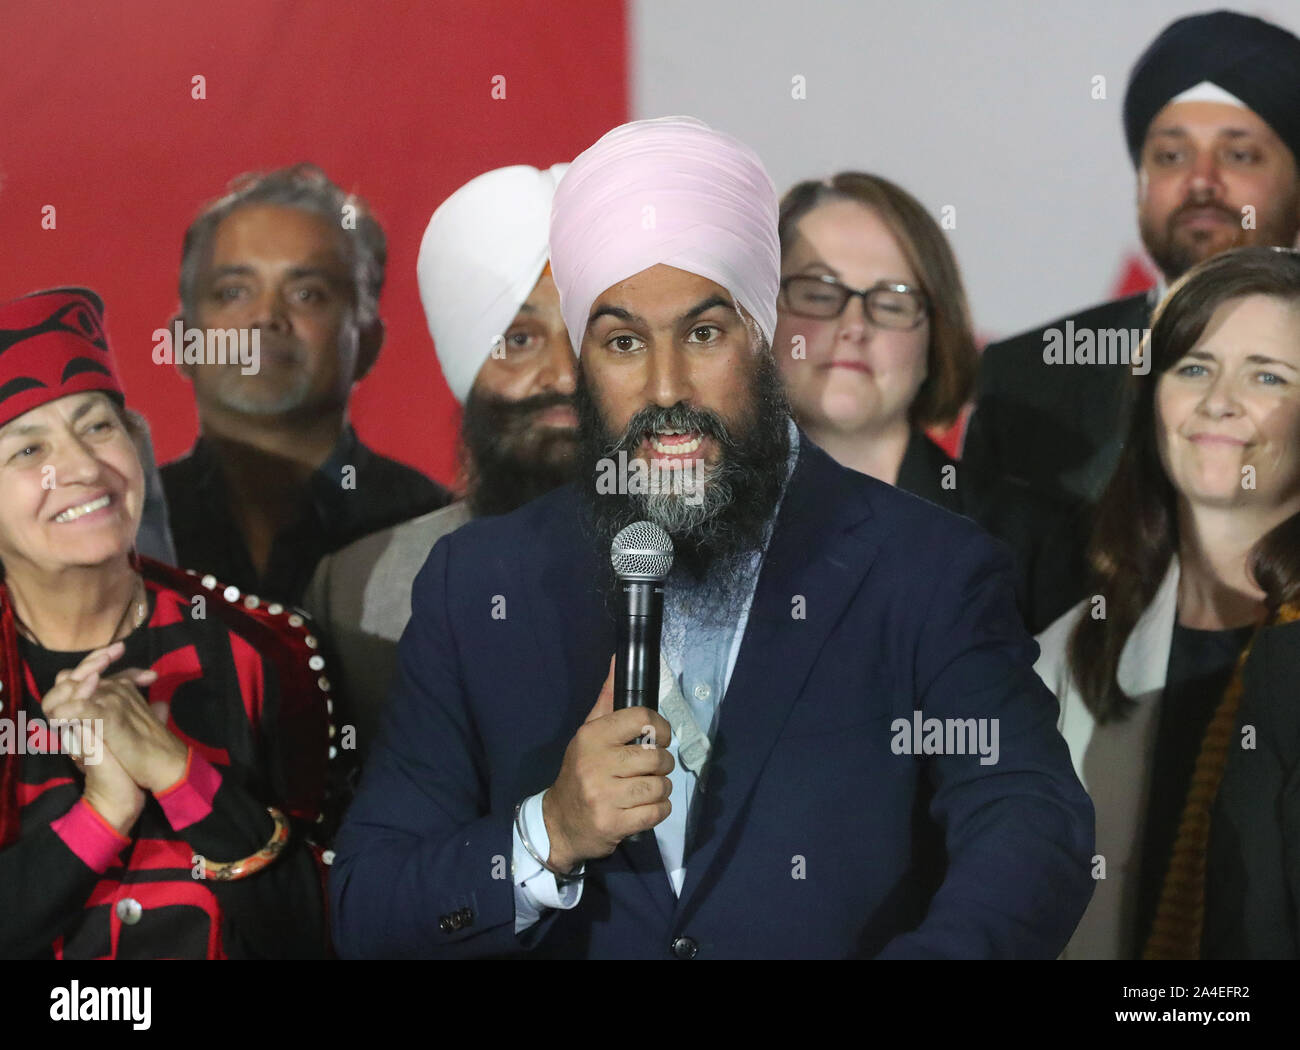 Canadian NDP Party leader Jagmeet Singh speaks at a rally in Surrey, British Columbia on Sunday, October 13, 2019 during a day of federal election campaigning in the BC lower mainland. Election day is October 21, 2019.  Photo by Heinz Ruckemann/UPI Stock Photo